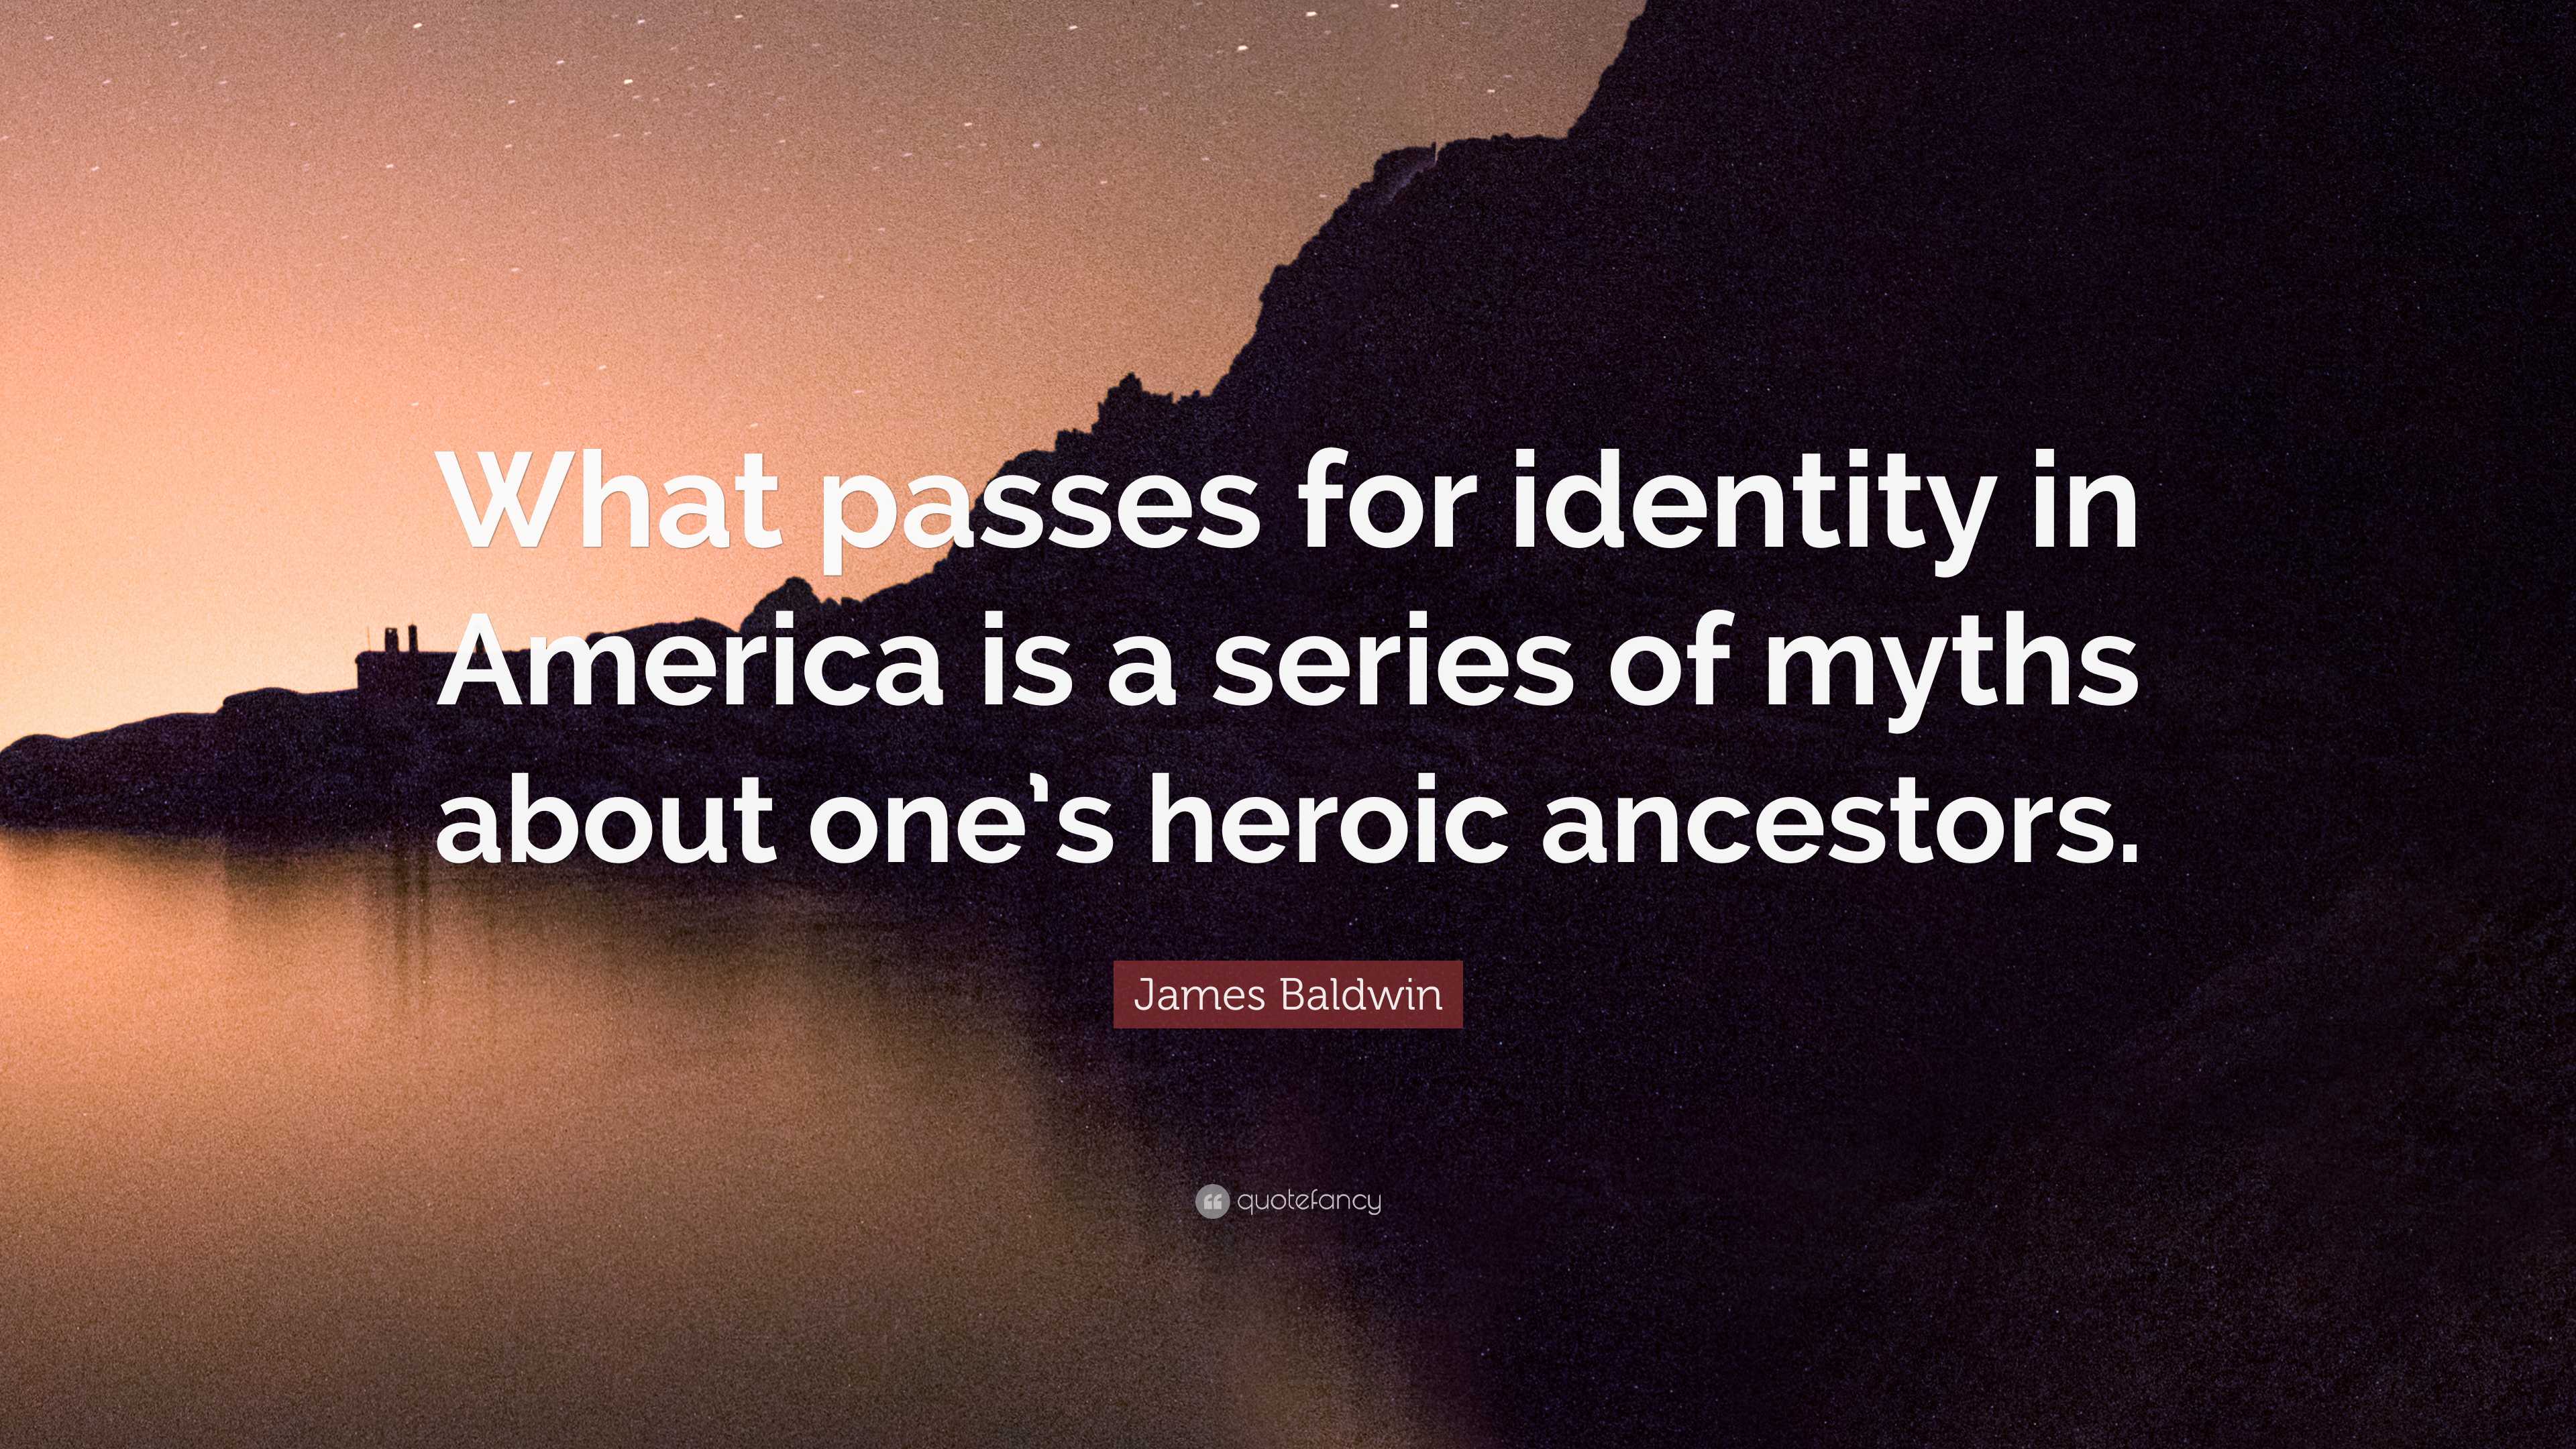 James Baldwin Quote: “What passes for identity in America is a series